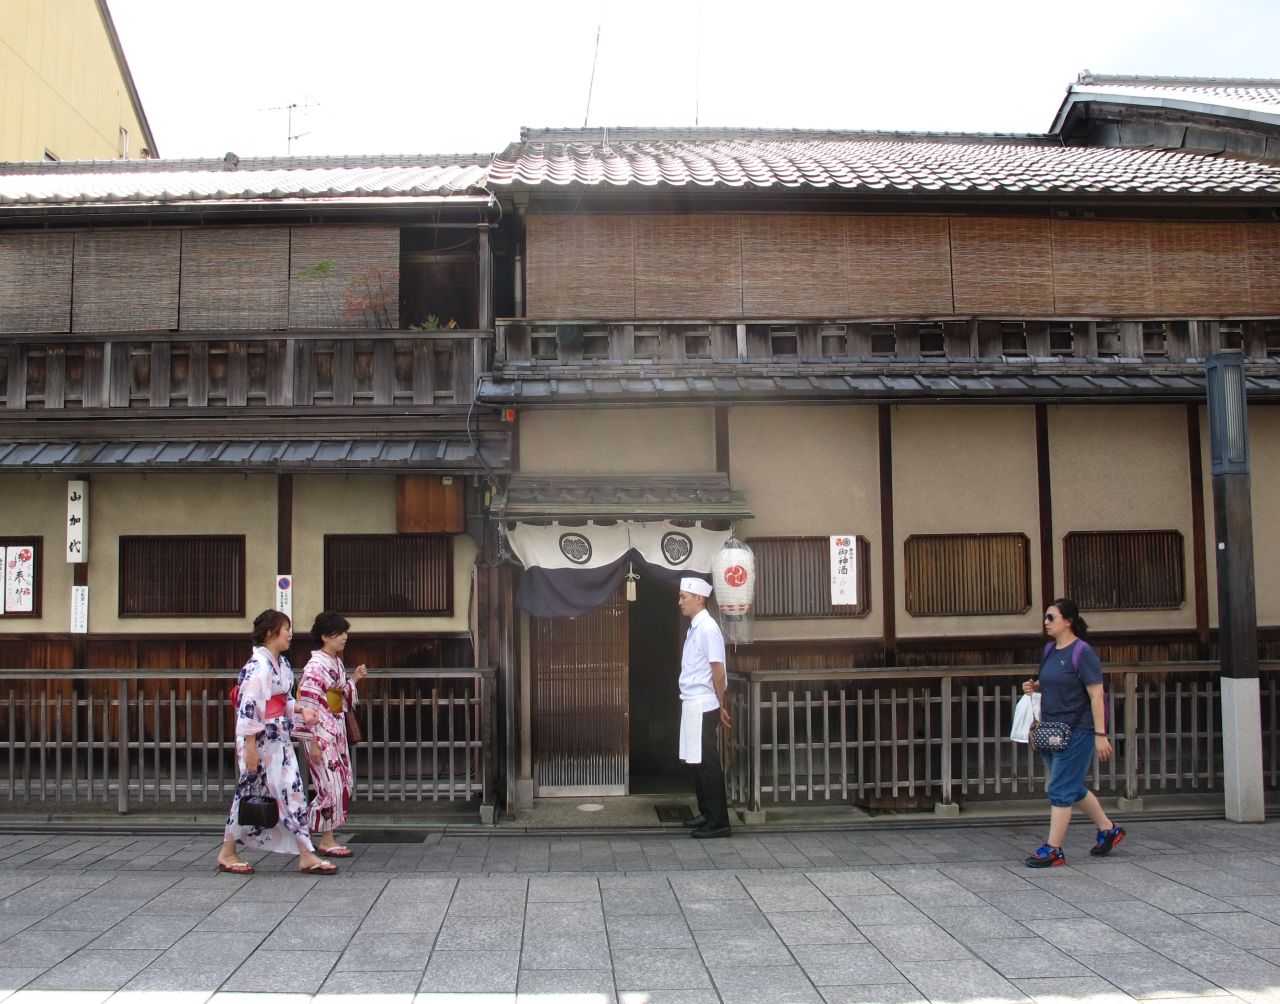 At Gion Karyo, the chef personally bids farewell to guests as they leave.